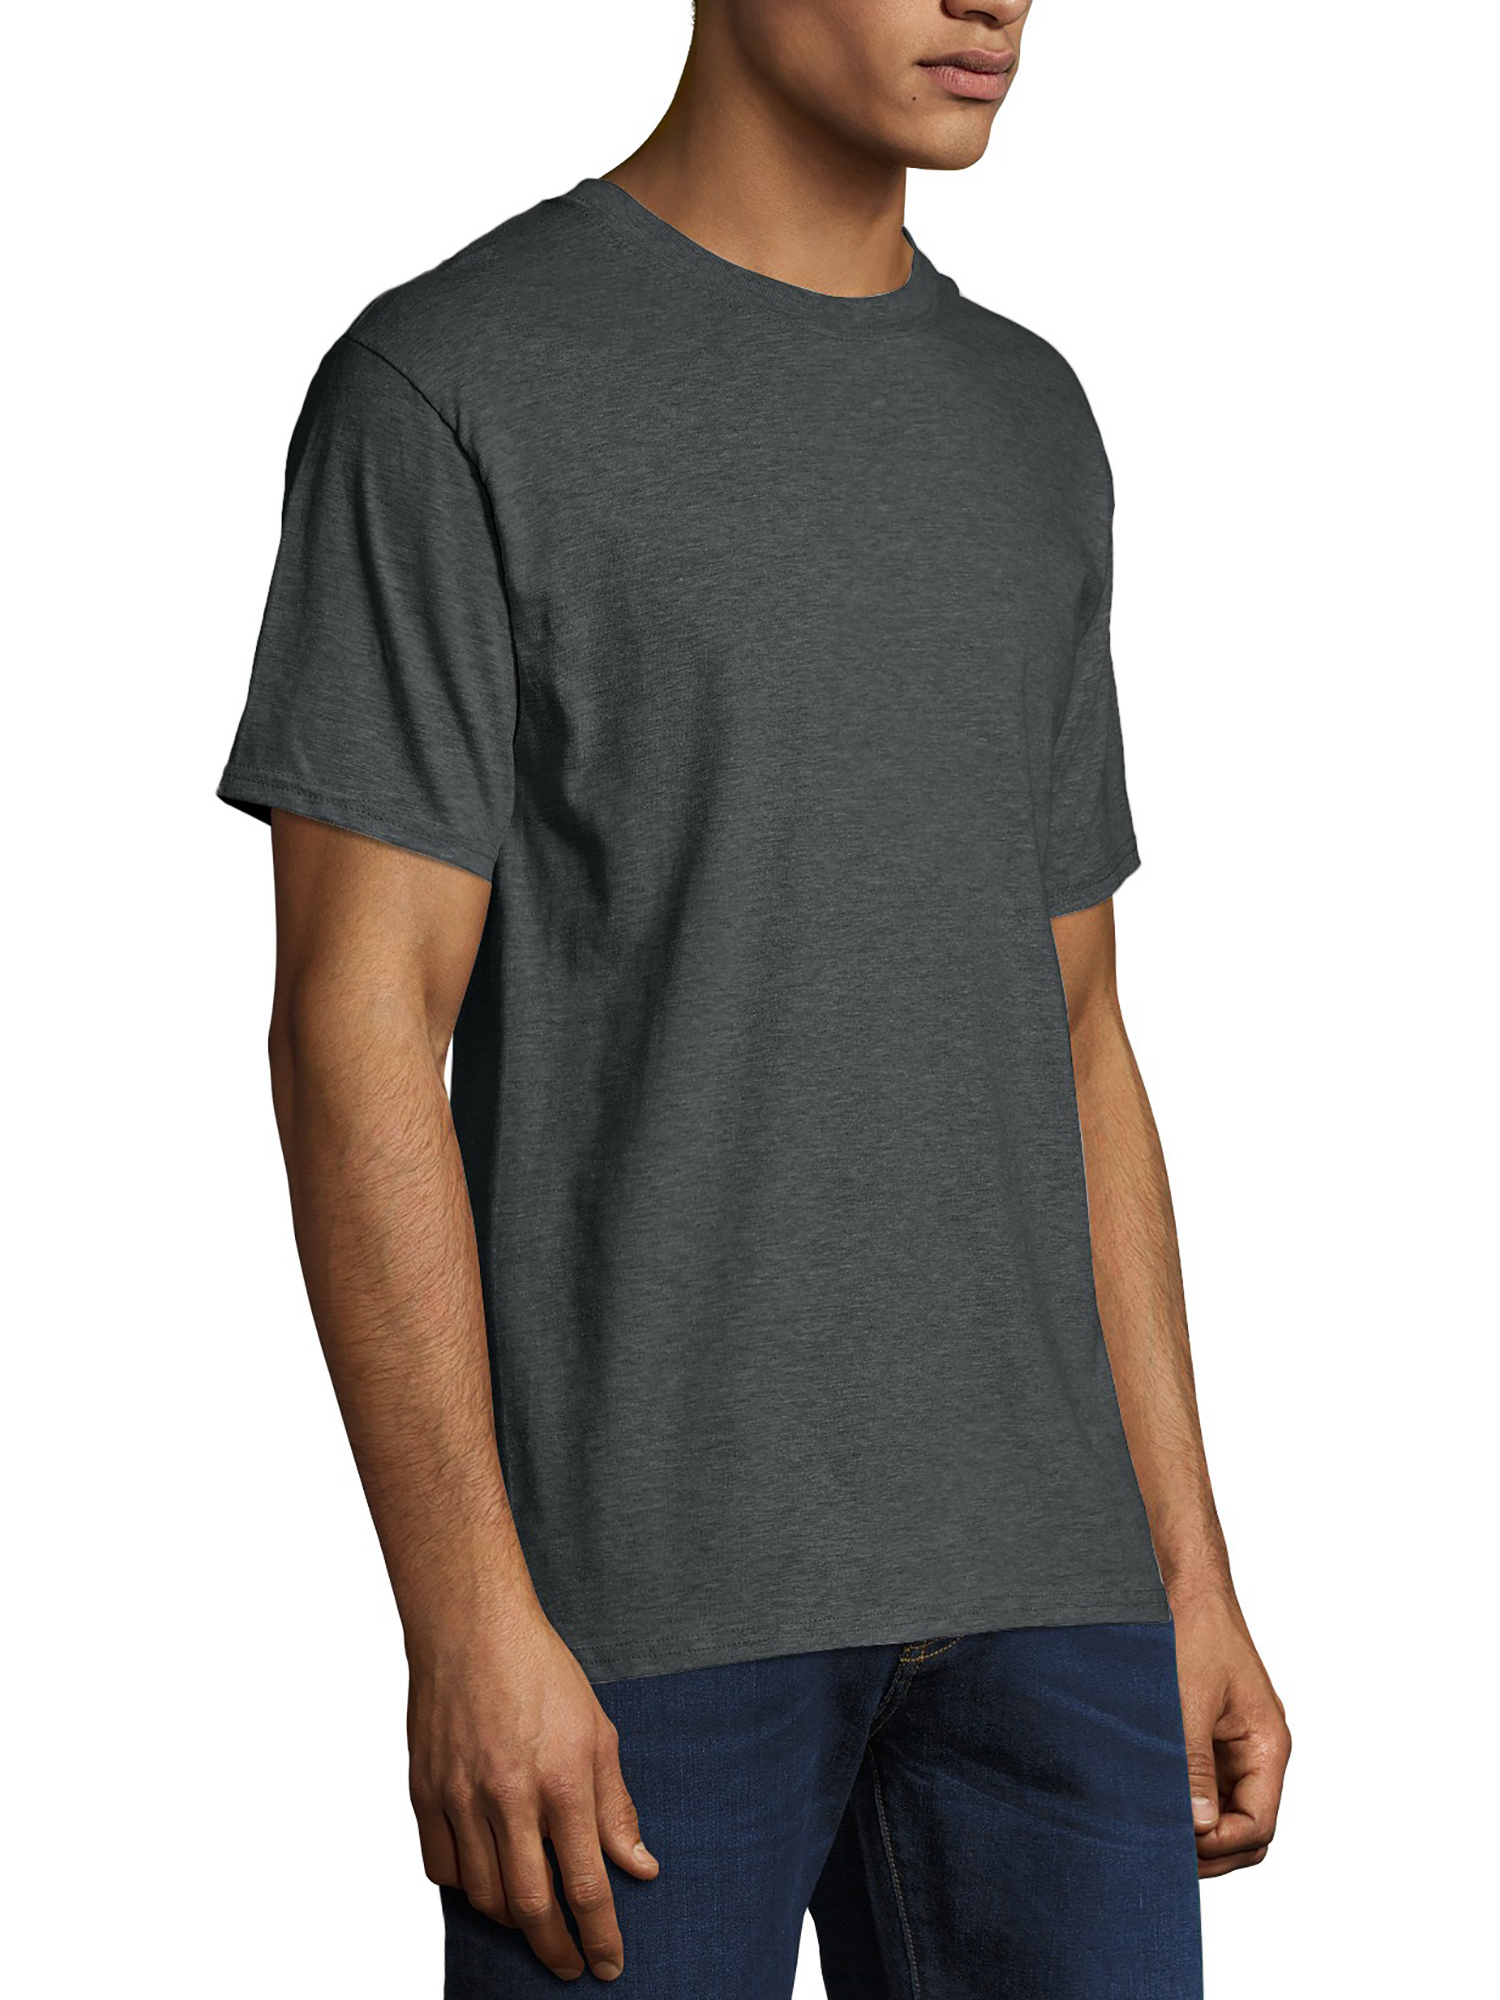 Hanes Men's and Big Men's Beefy-T Crew Neck Short Sleeve T-Shirt, Up To 6XL - image 3 of 7